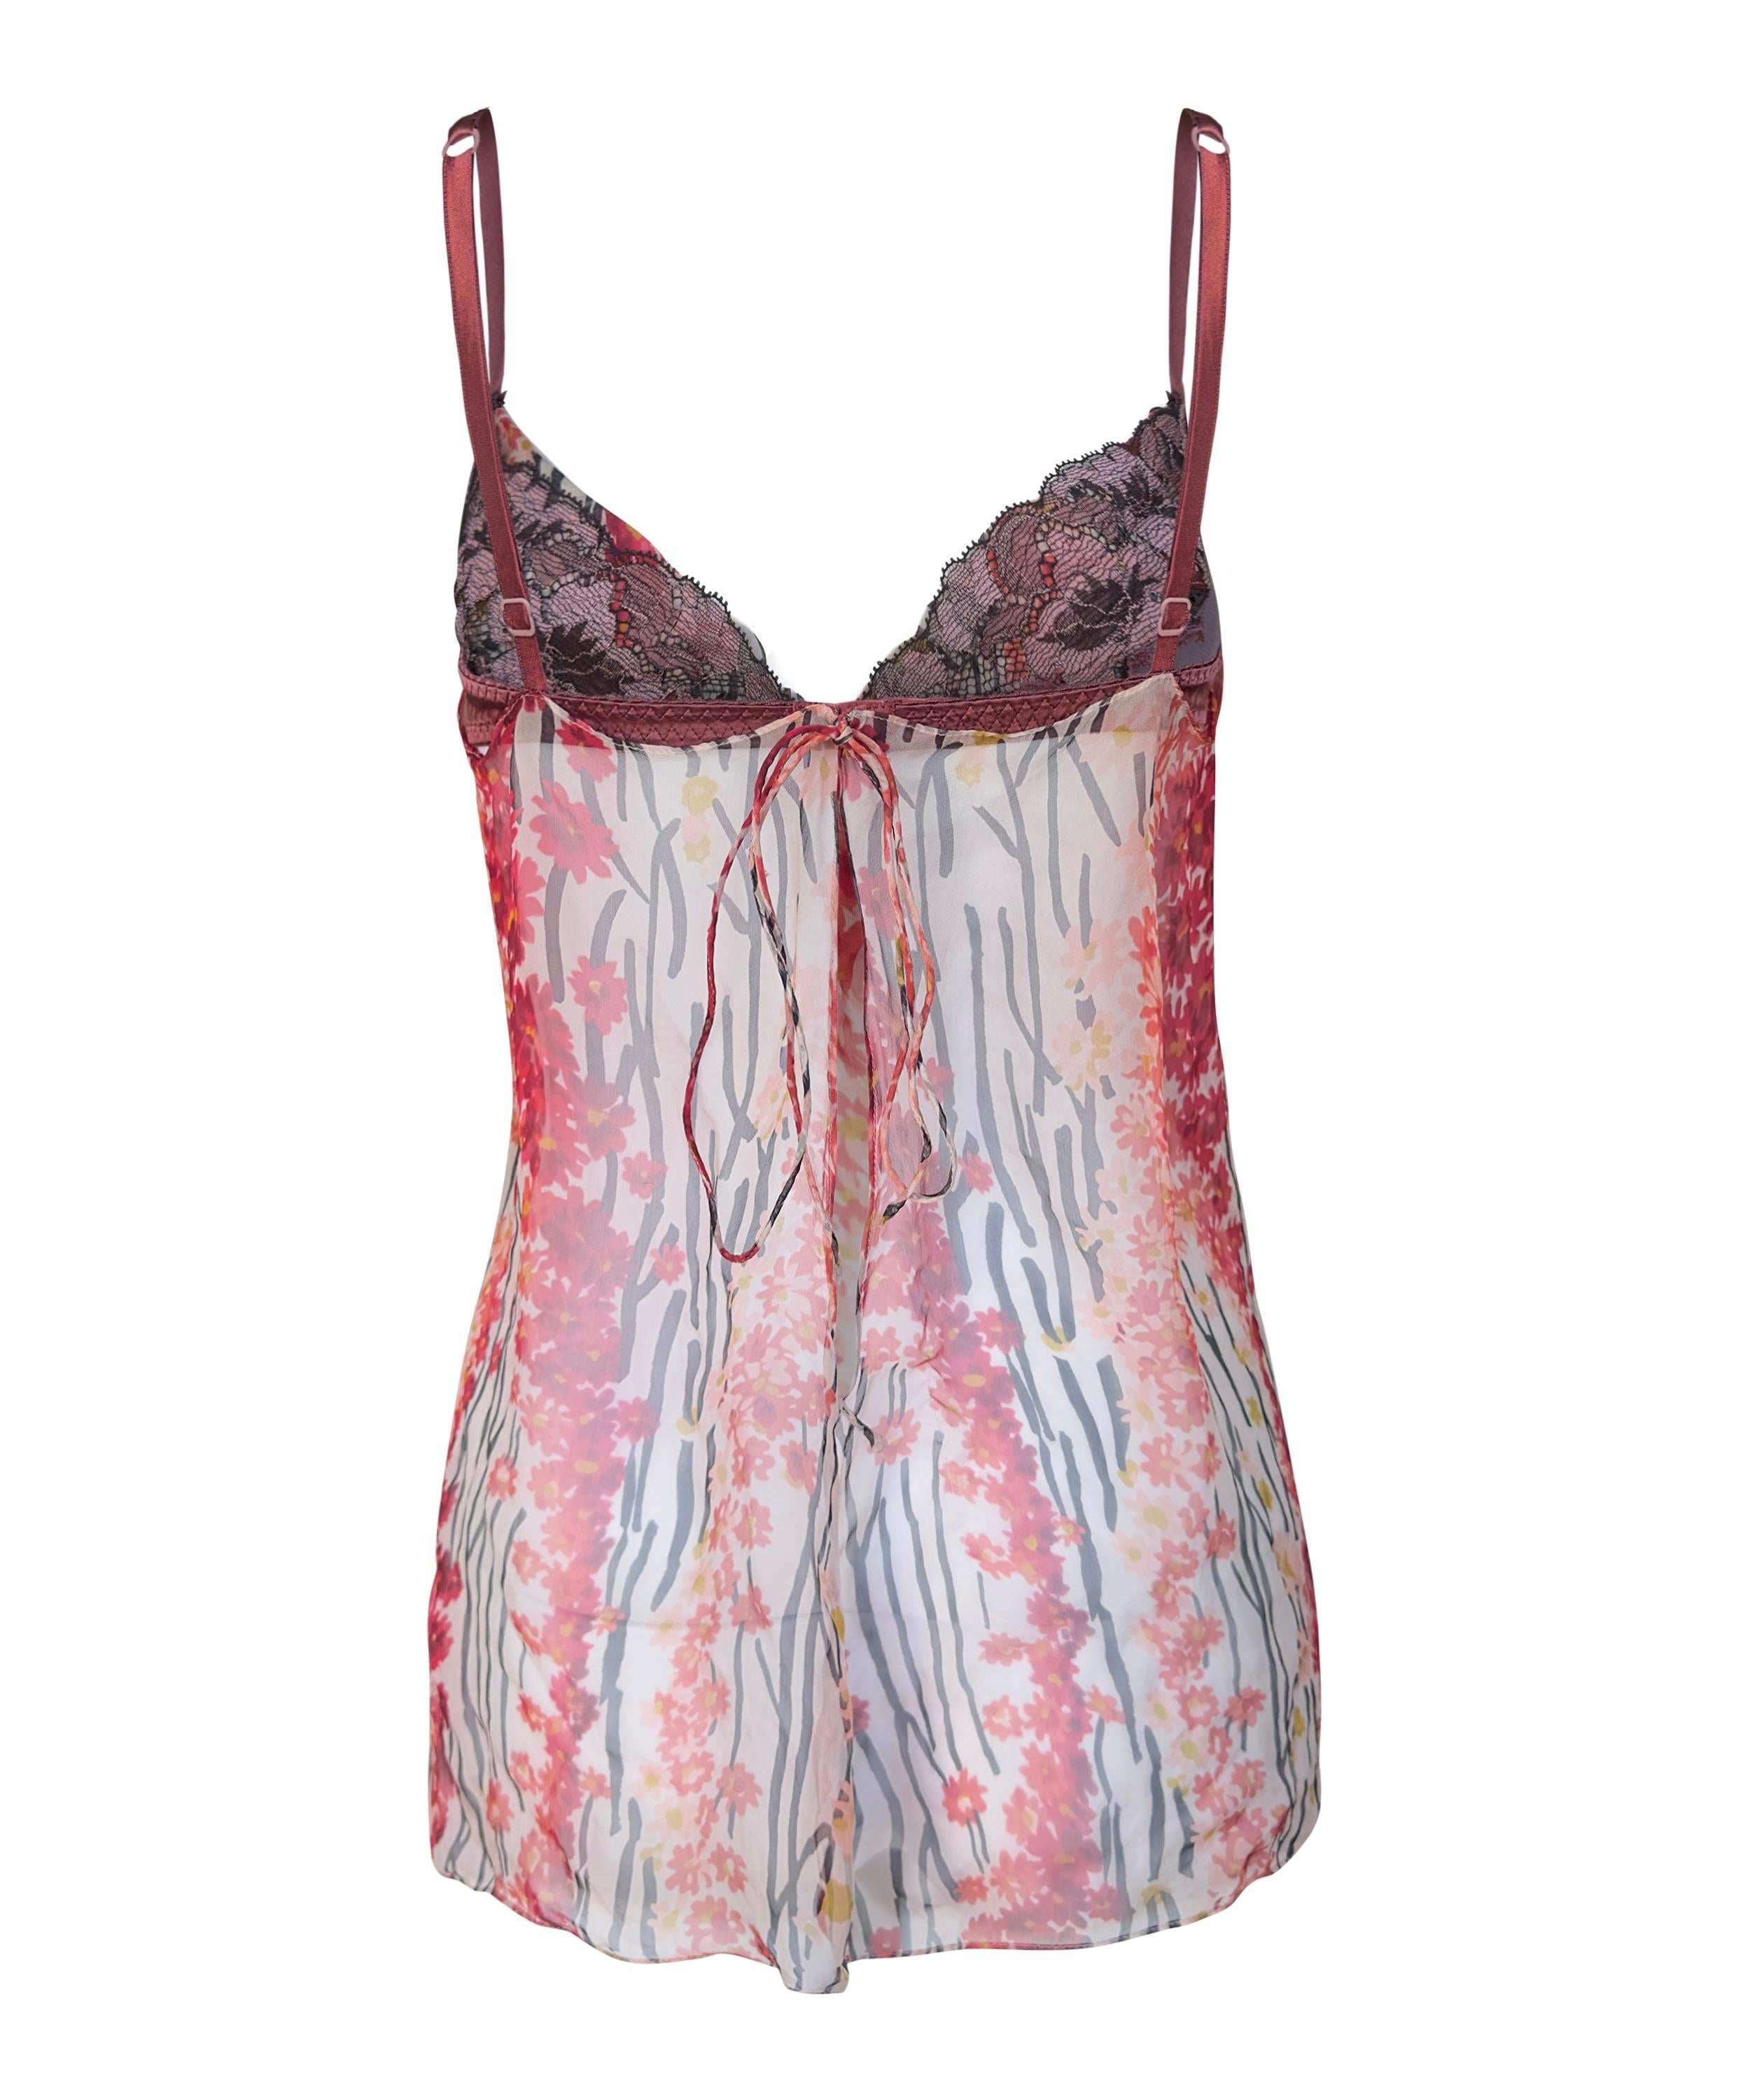 Vintage Dolce & Gabbana runway SS 2004 floral silk cami top In Excellent Condition For Sale In London, GB